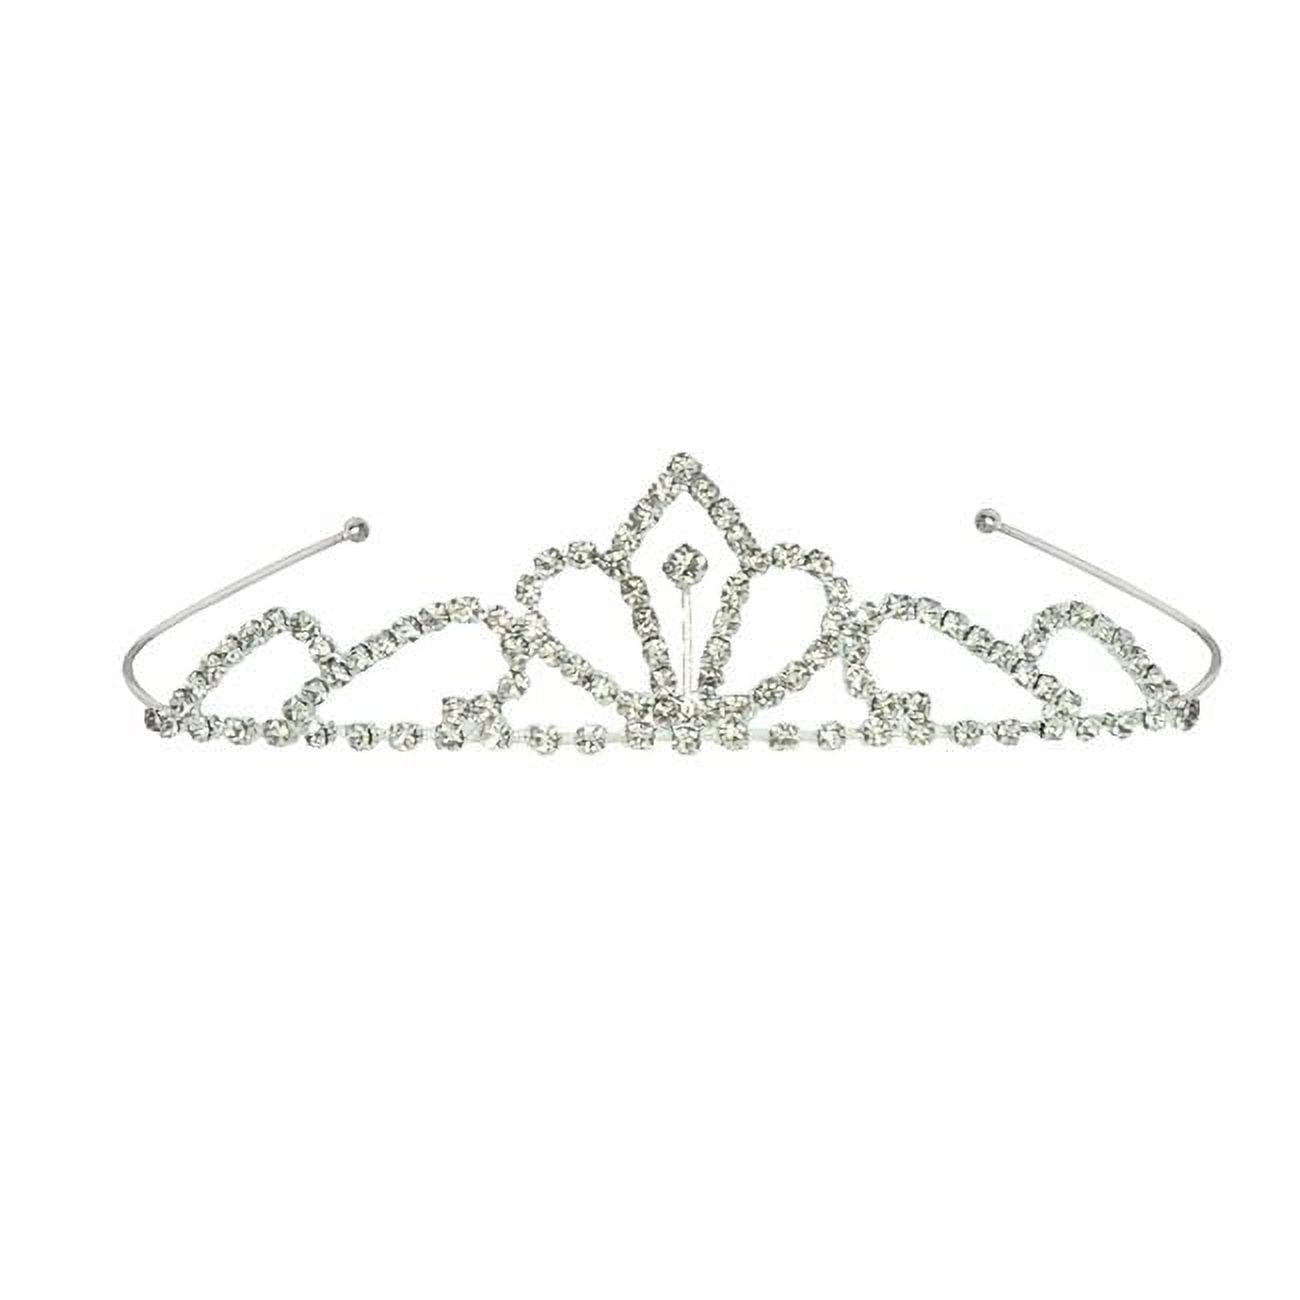 Picture of Beistle 60077 Royal Rhinestone Tiara, White - Pack of 6